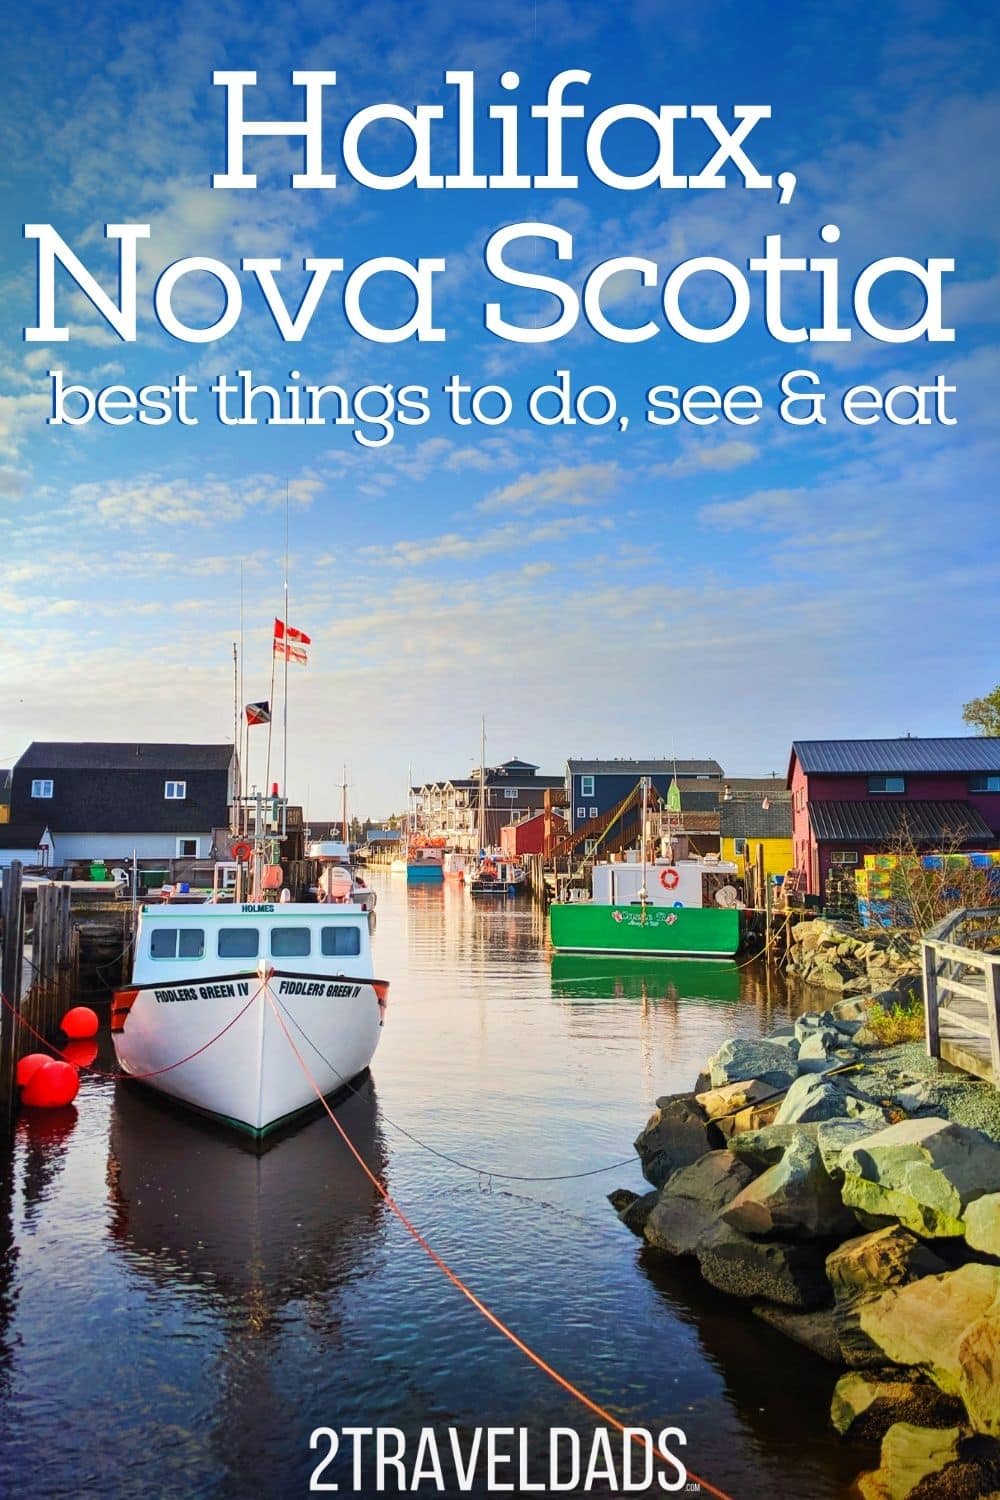 Halifax, Nova Scotia is a beautiful city, surrounded by water and history. These are the best things to do and eat in Halifax, recommendations for where to stay, and when to visit Halifax.